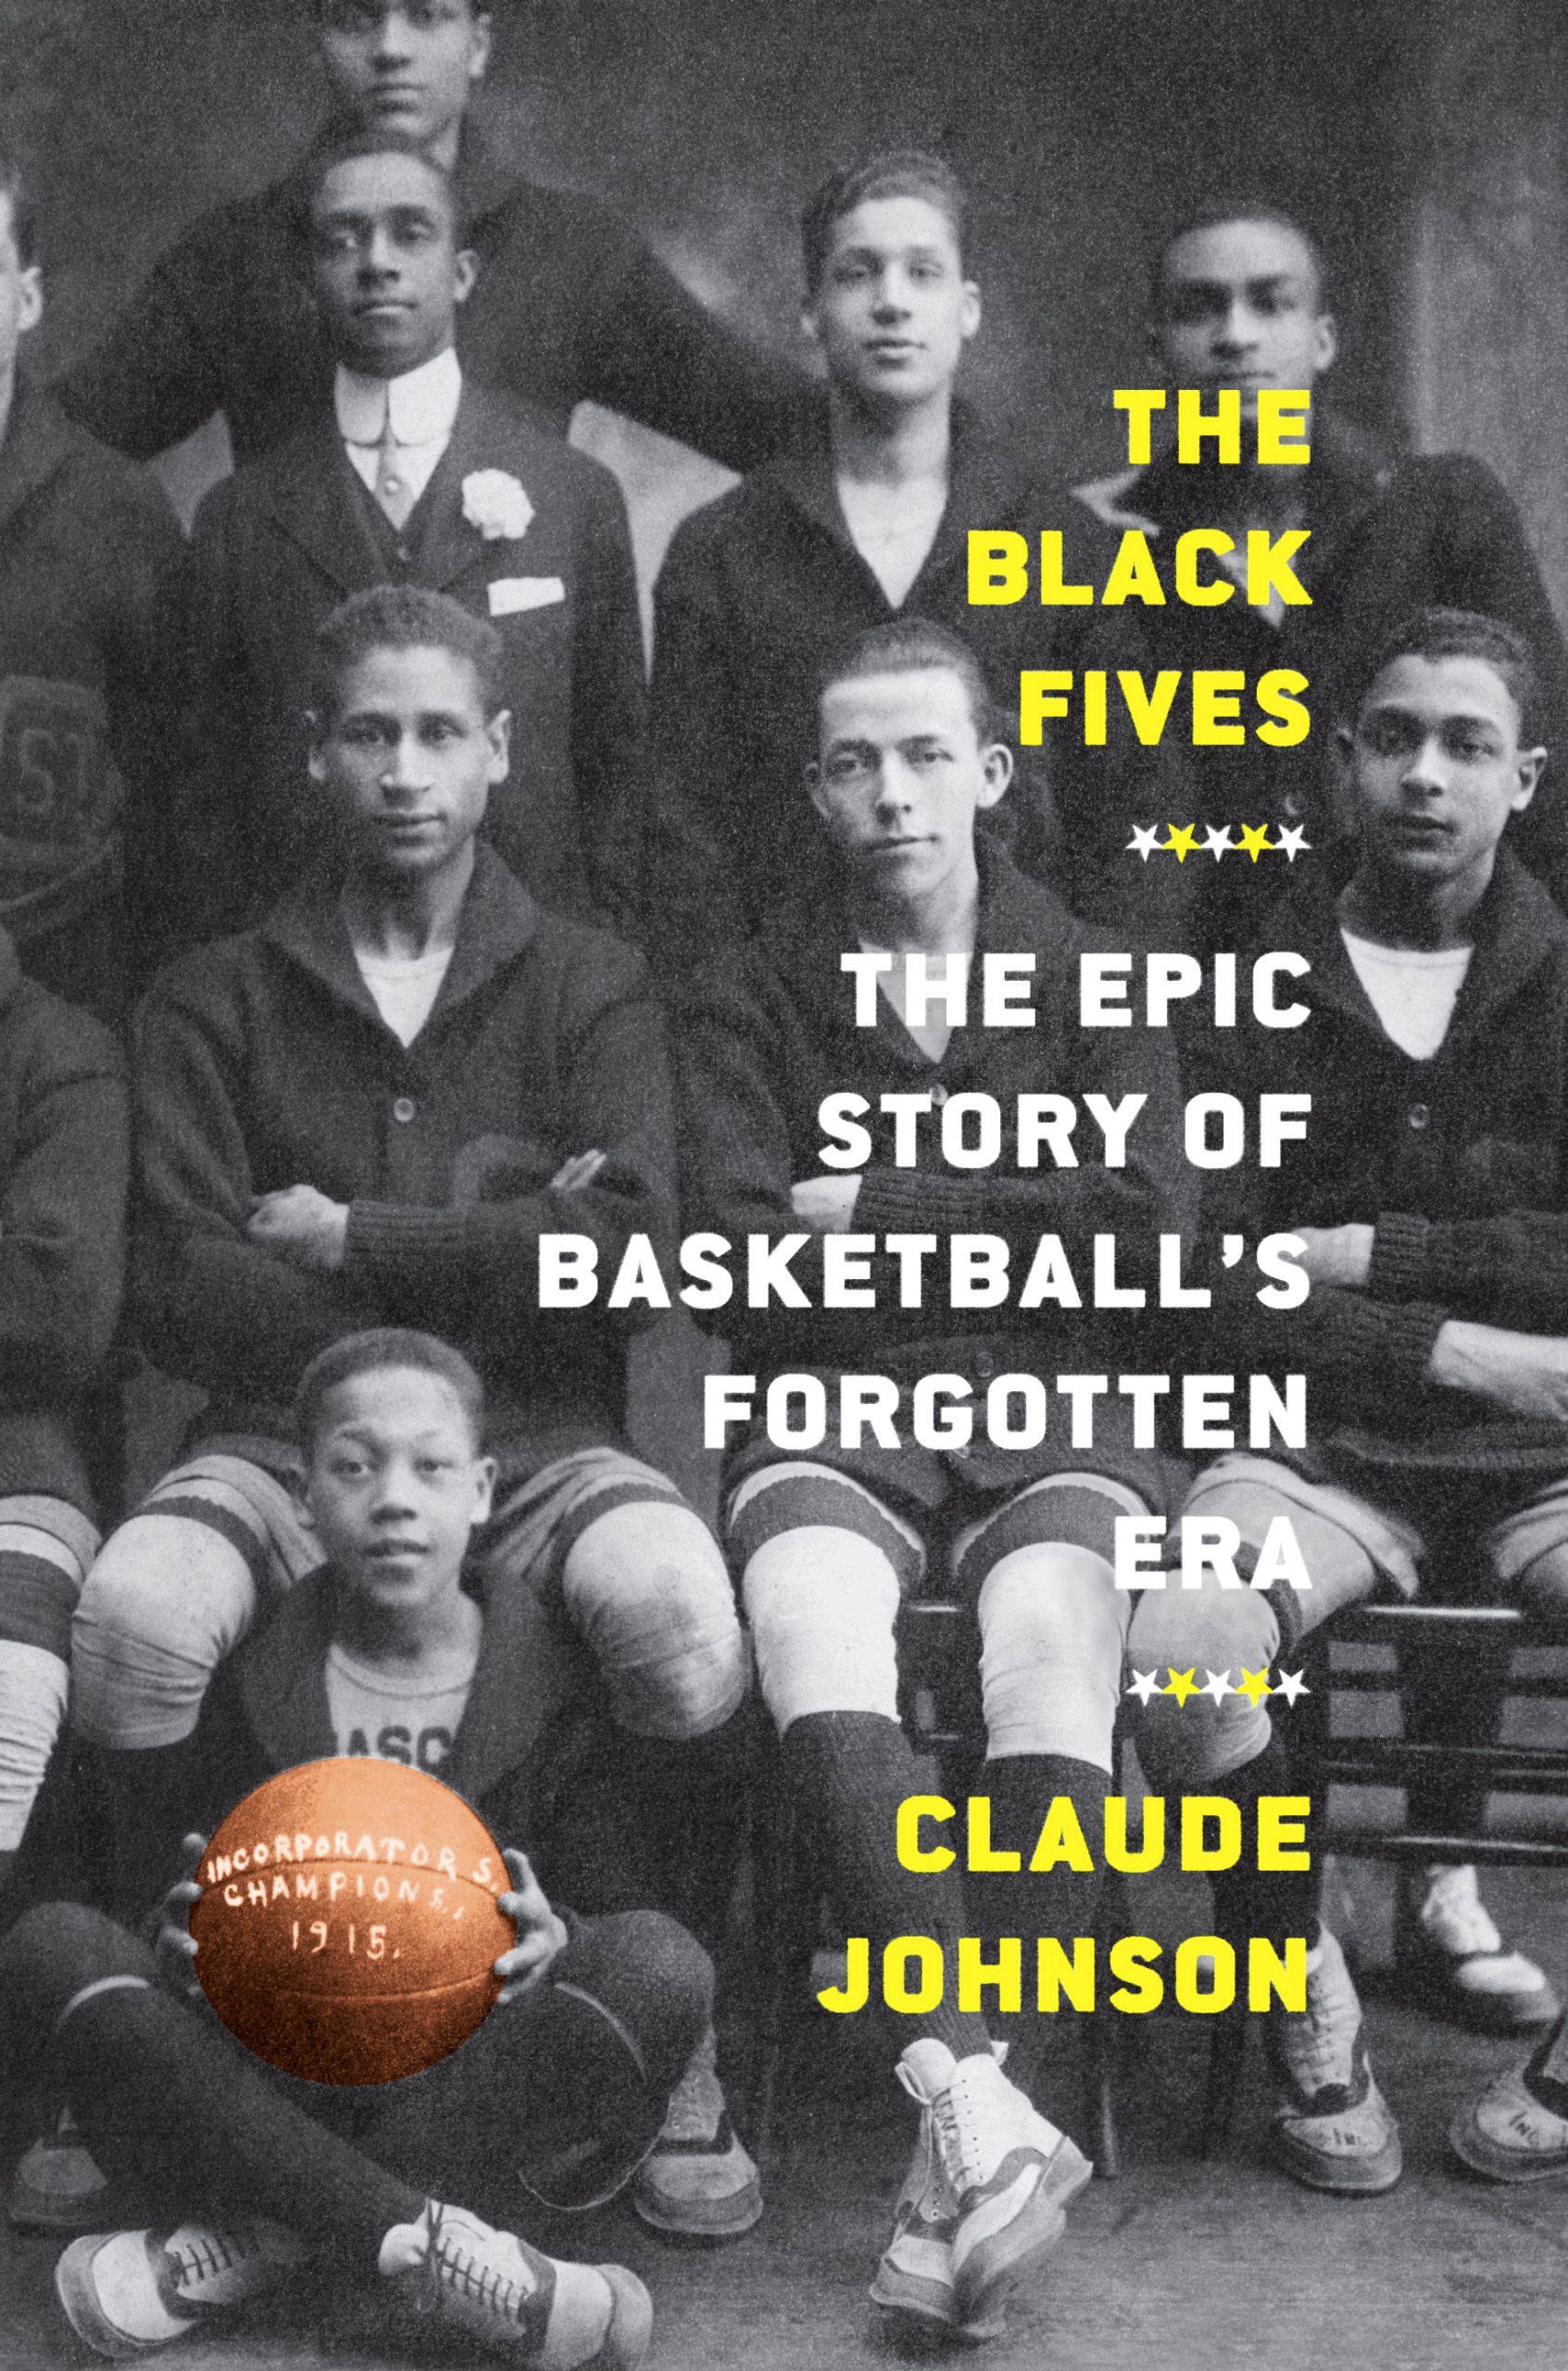 The Black Fives, the Big East and the part of basketball history being